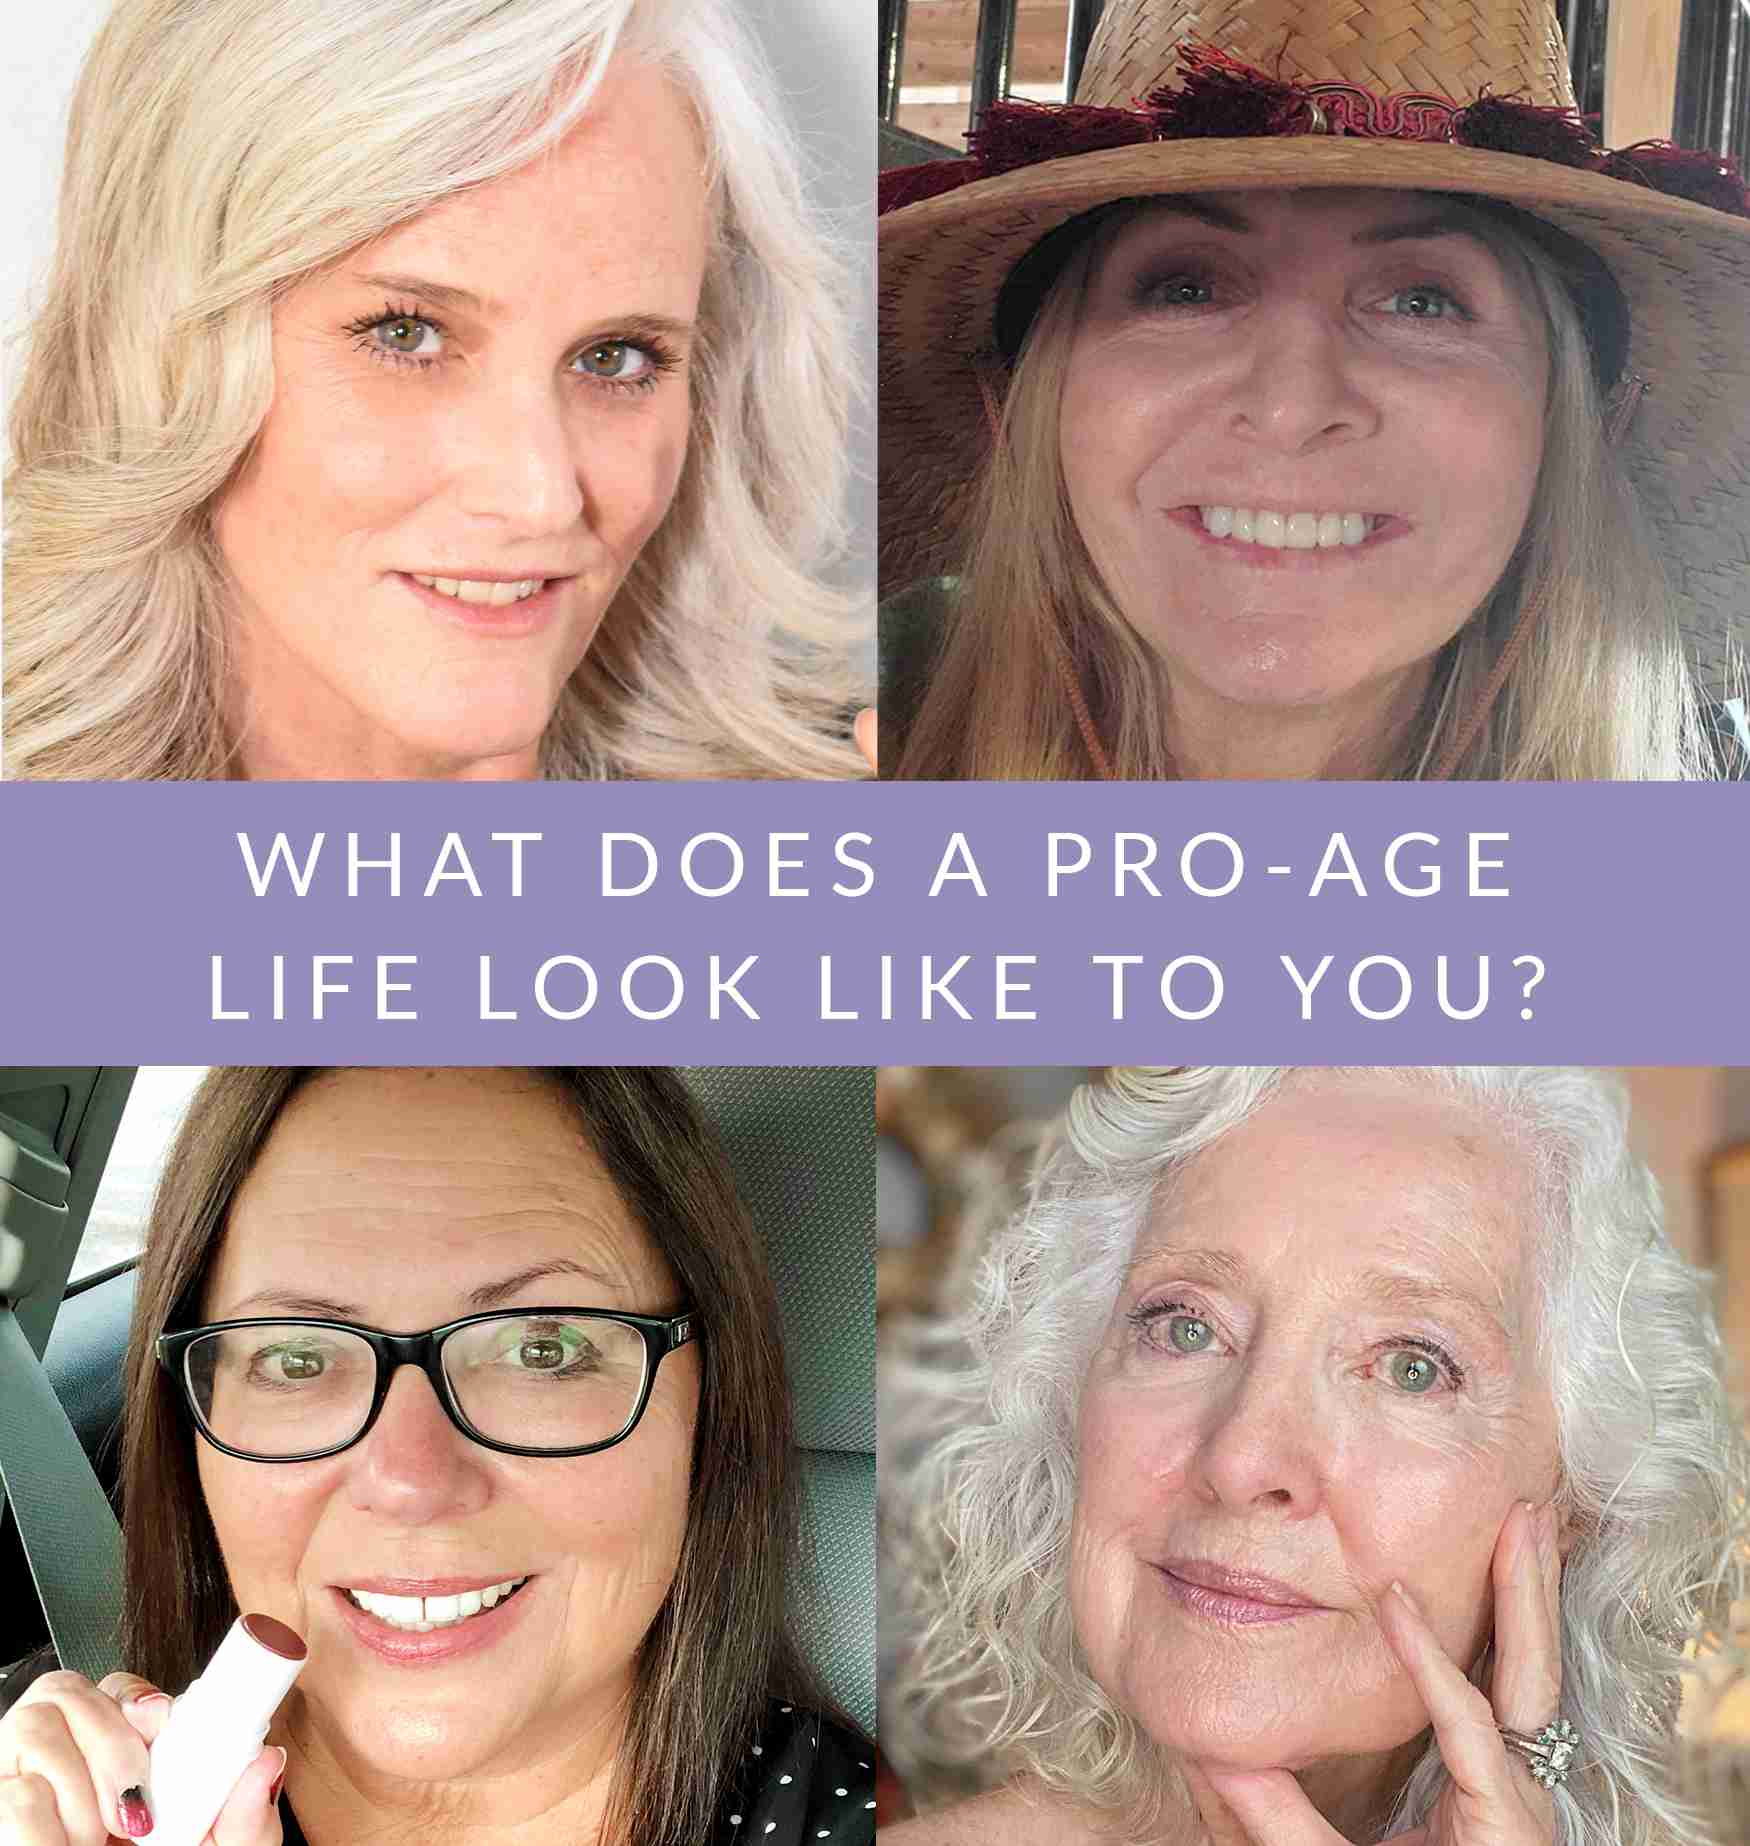 What does a Pro-age life look like to you?